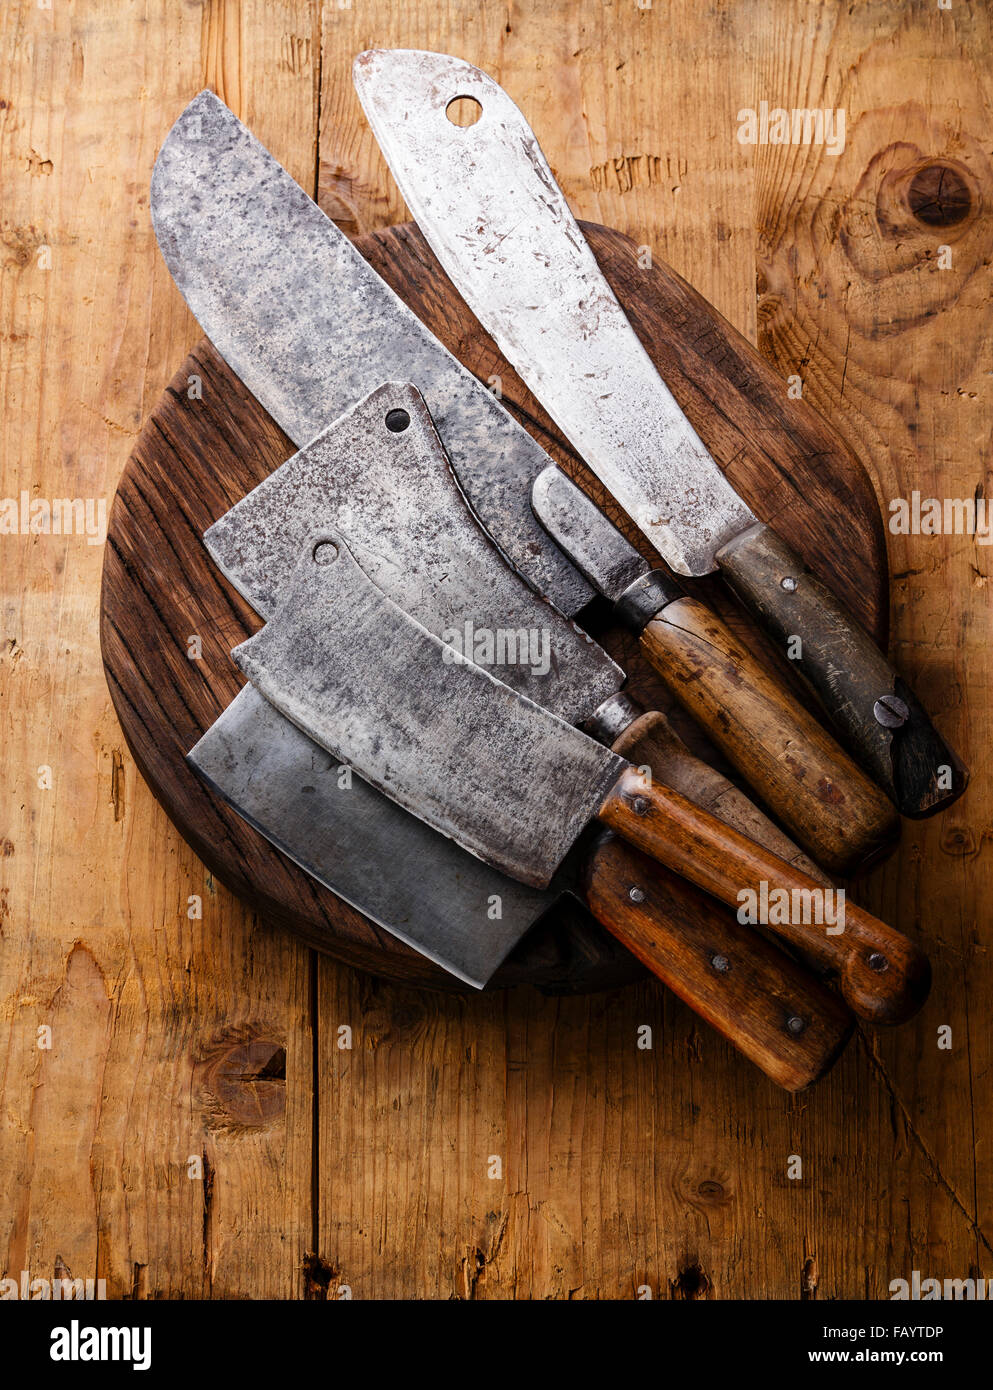 https://c8.alamy.com/comp/FAYTDP/butcher-meat-cleavers-large-chefs-knives-on-chopping-board-block-on-FAYTDP.jpg